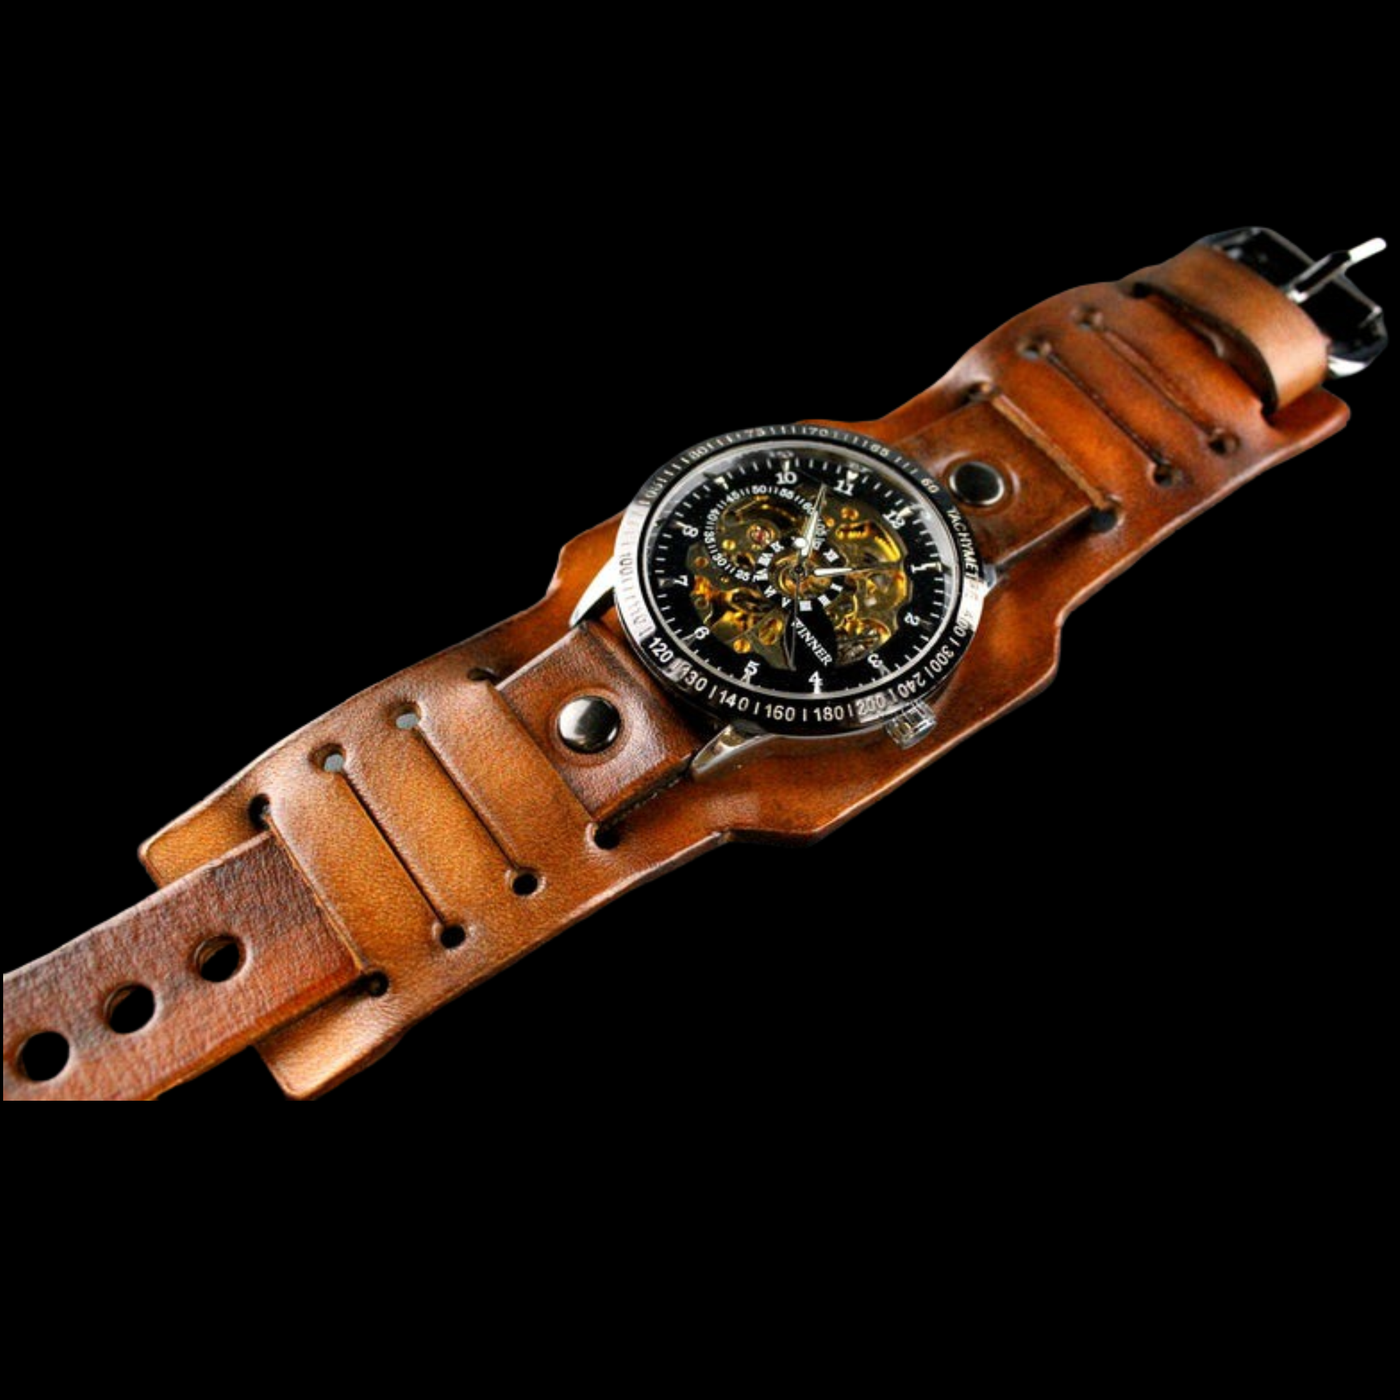 The Renegade Leather Cuff Watch